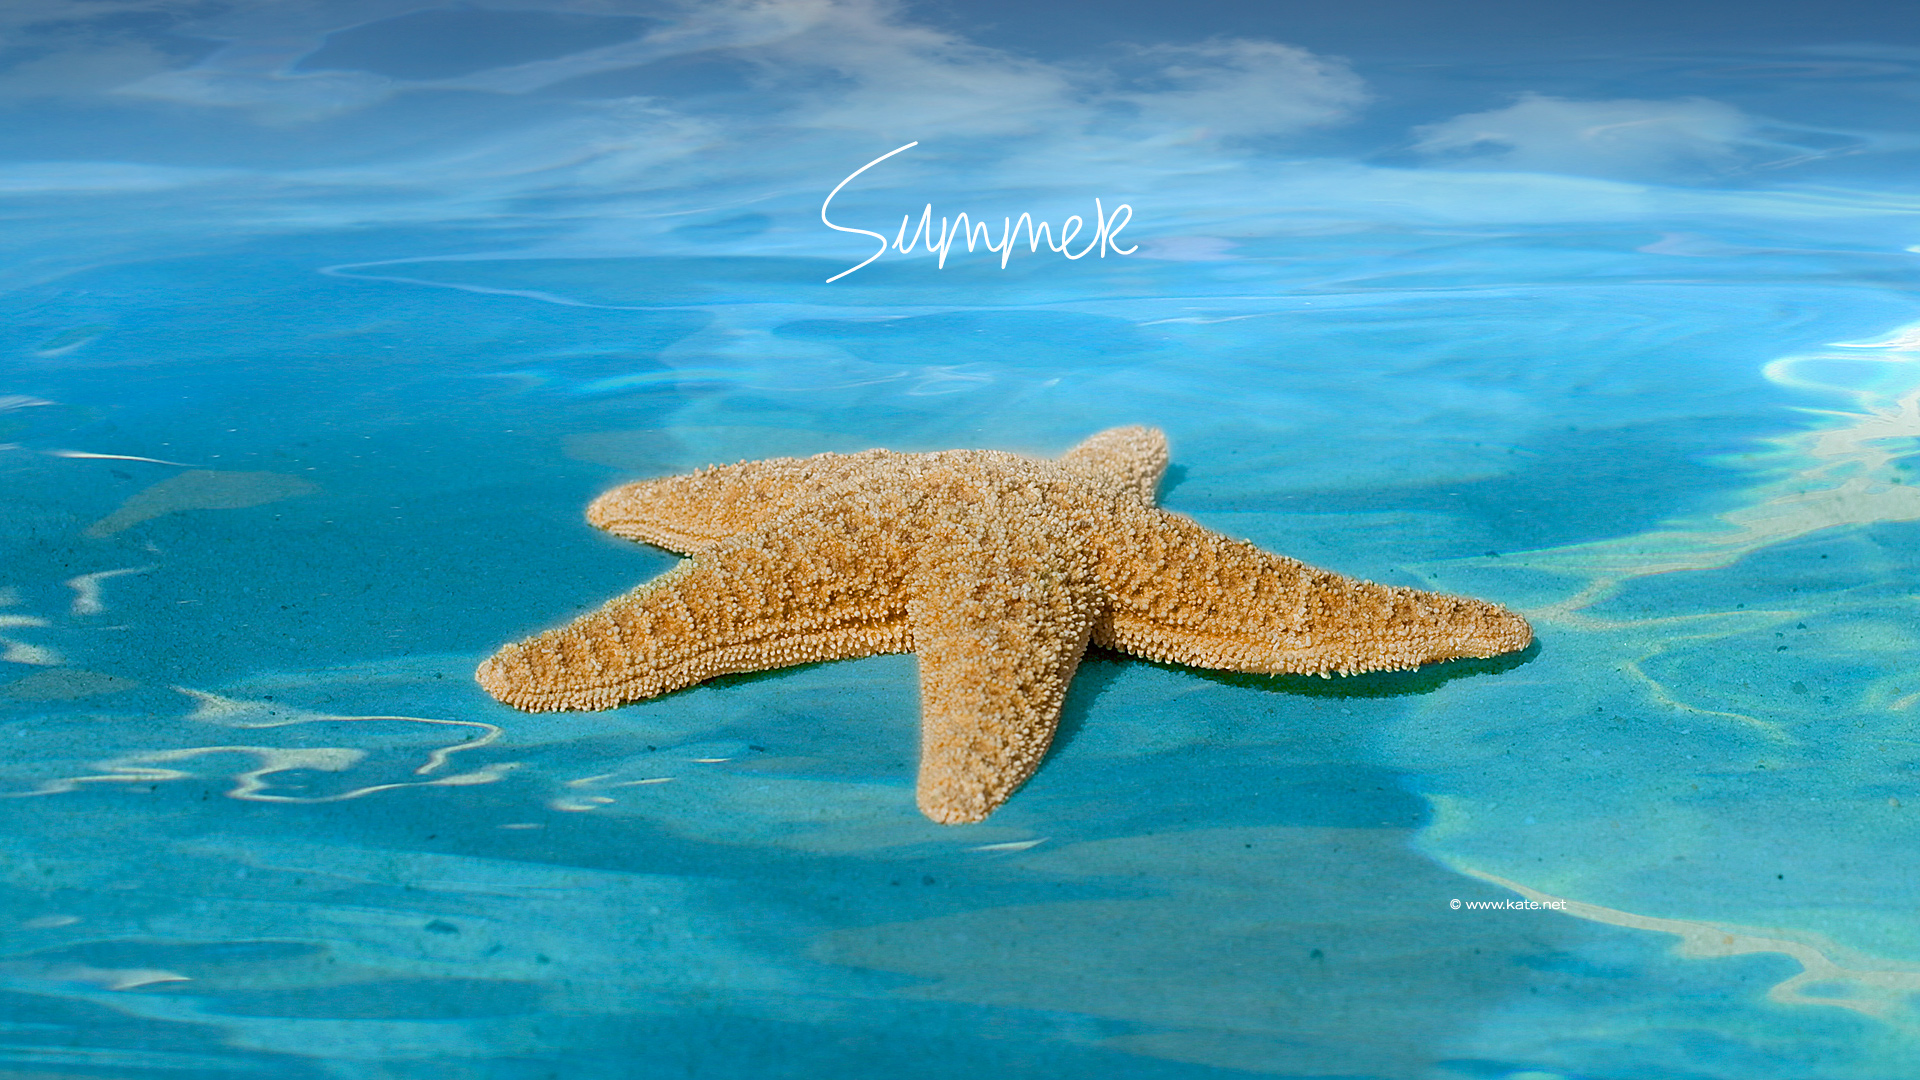 Summer Pictures For Desktop And Screensavers